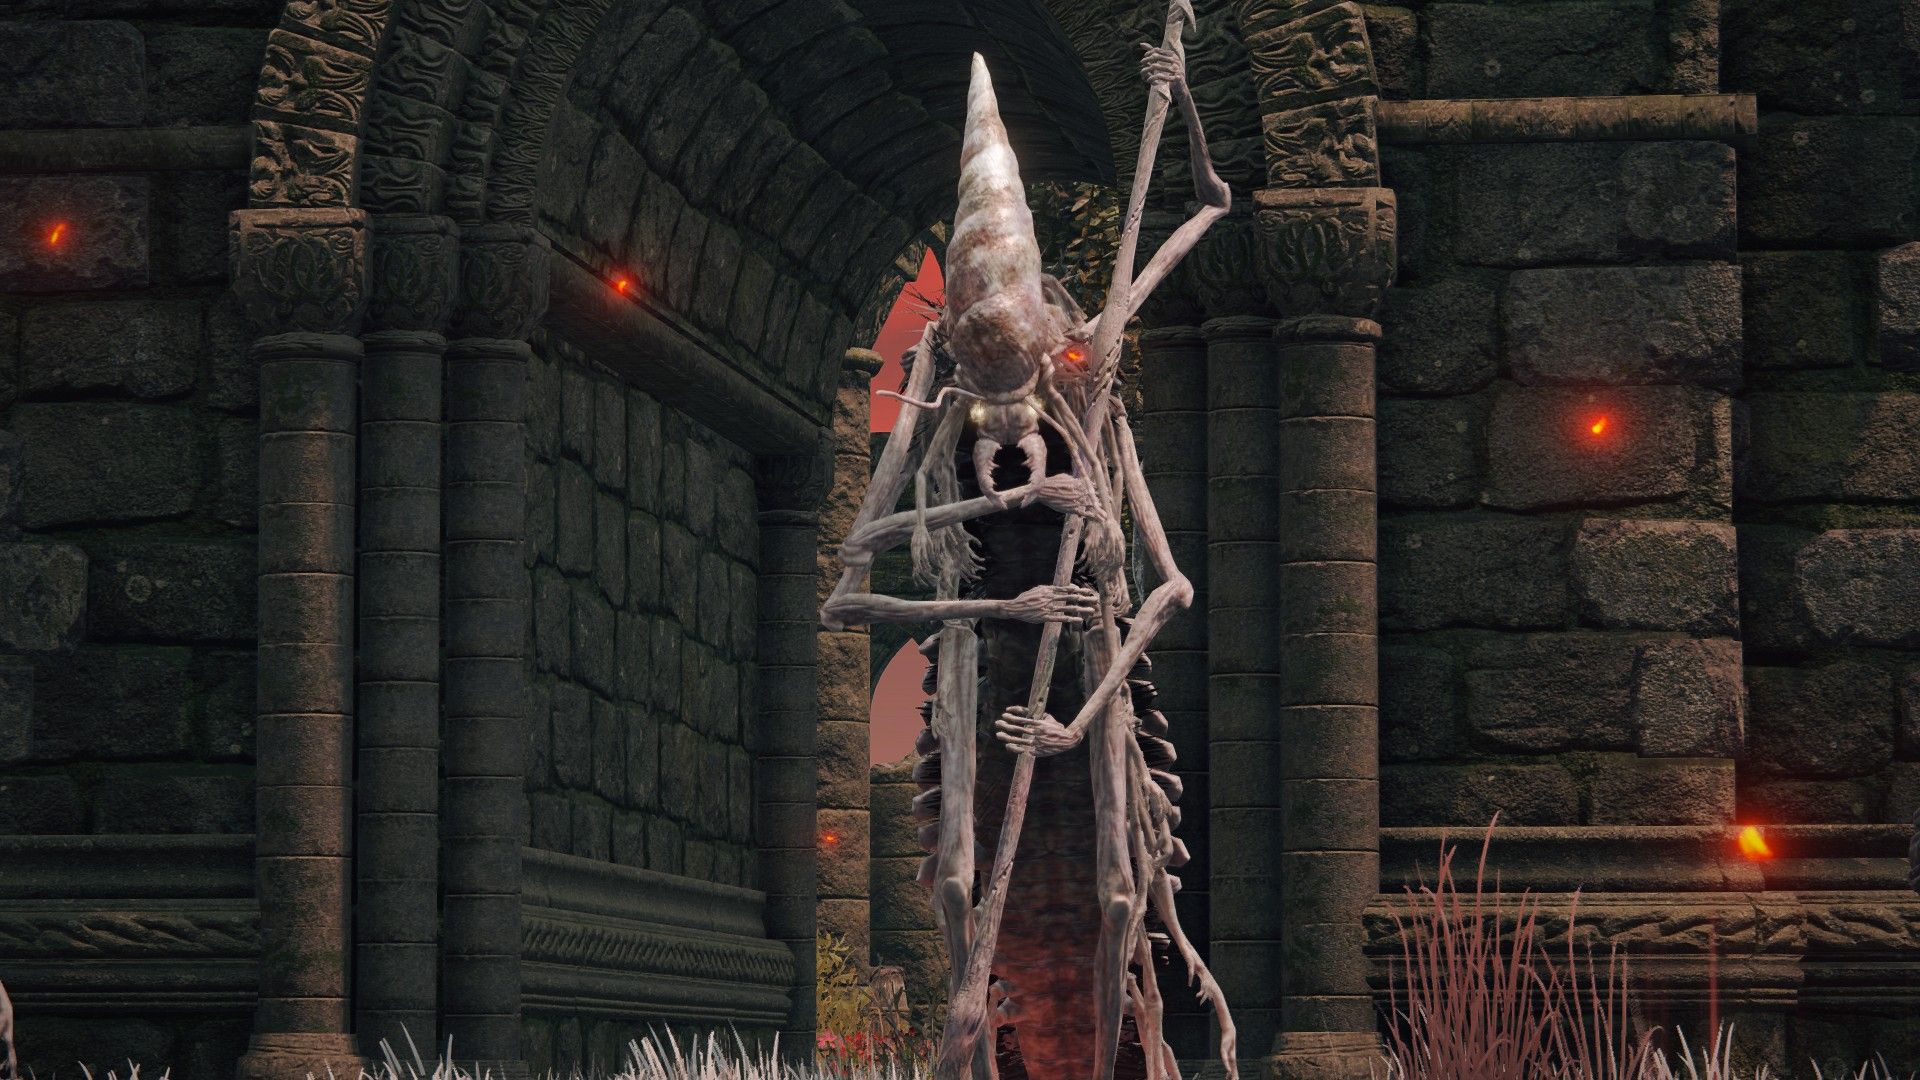 Elden Ring Pest, a centipede humanoid creature, standing and holding a tall weapon in front of a stone structure.